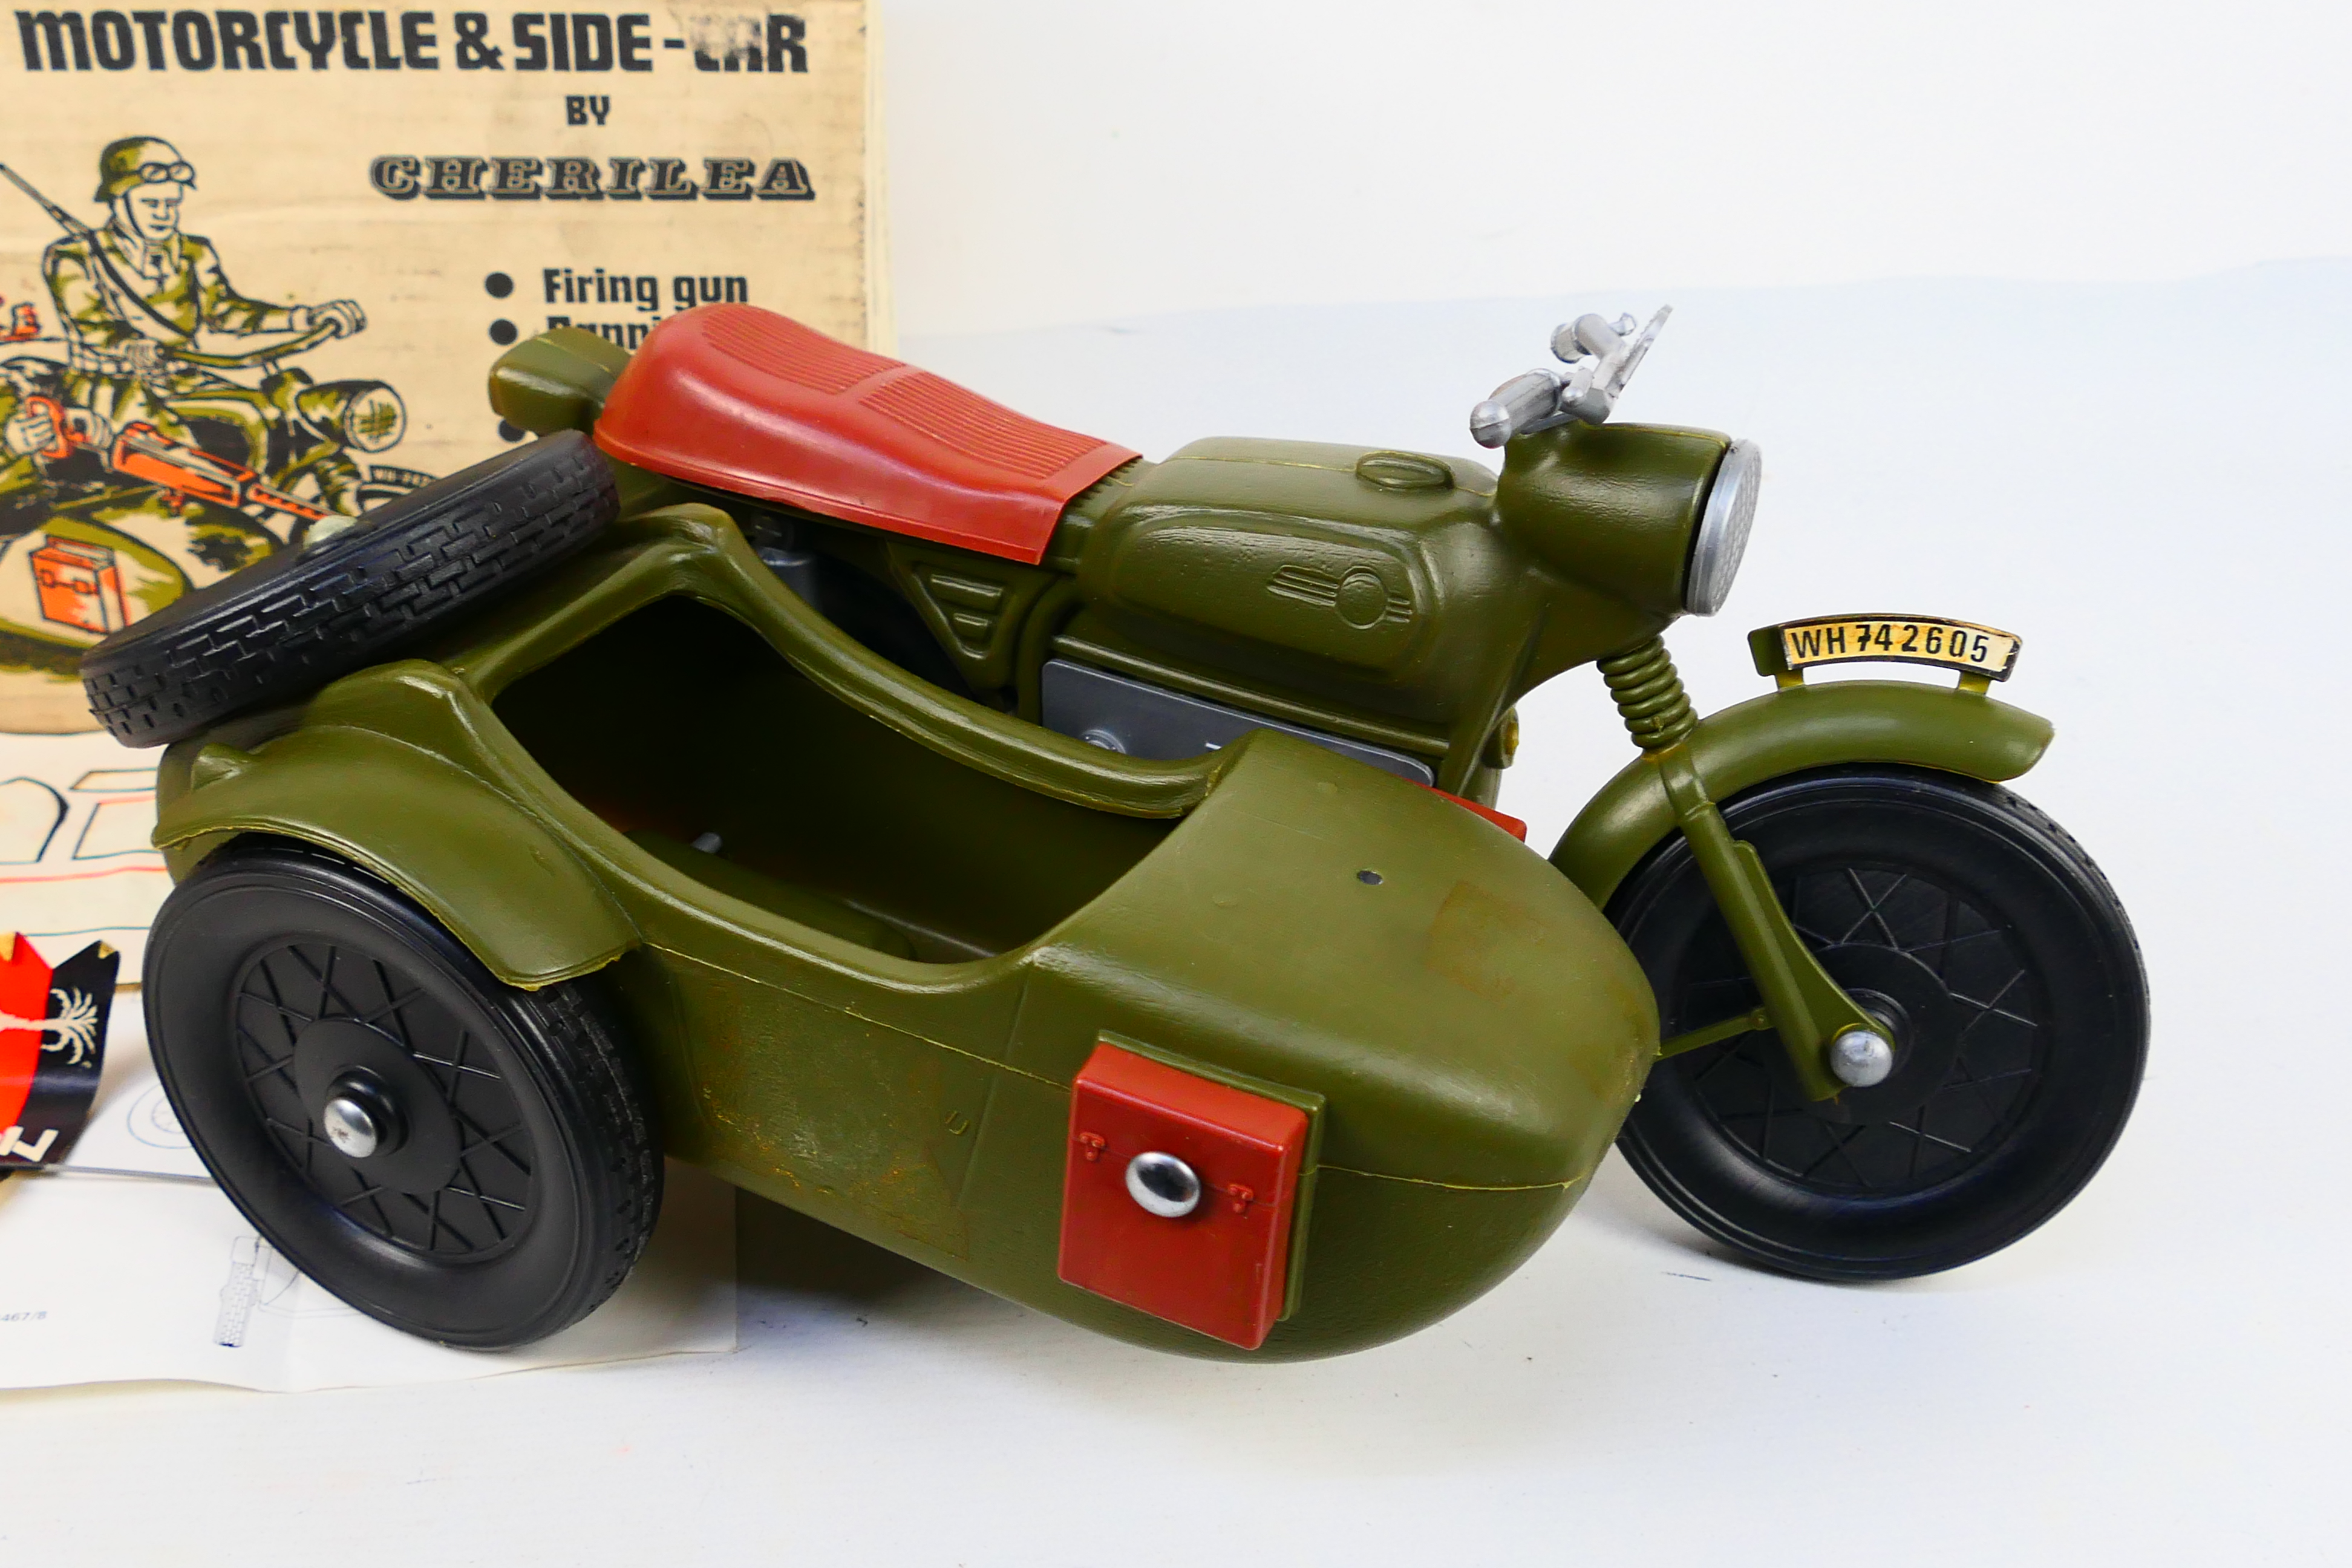 Cherilea Toys - Battle Force. A boxed Cherilea Toys made German Army Motorcycle & Sidecar #2605. - Image 4 of 8